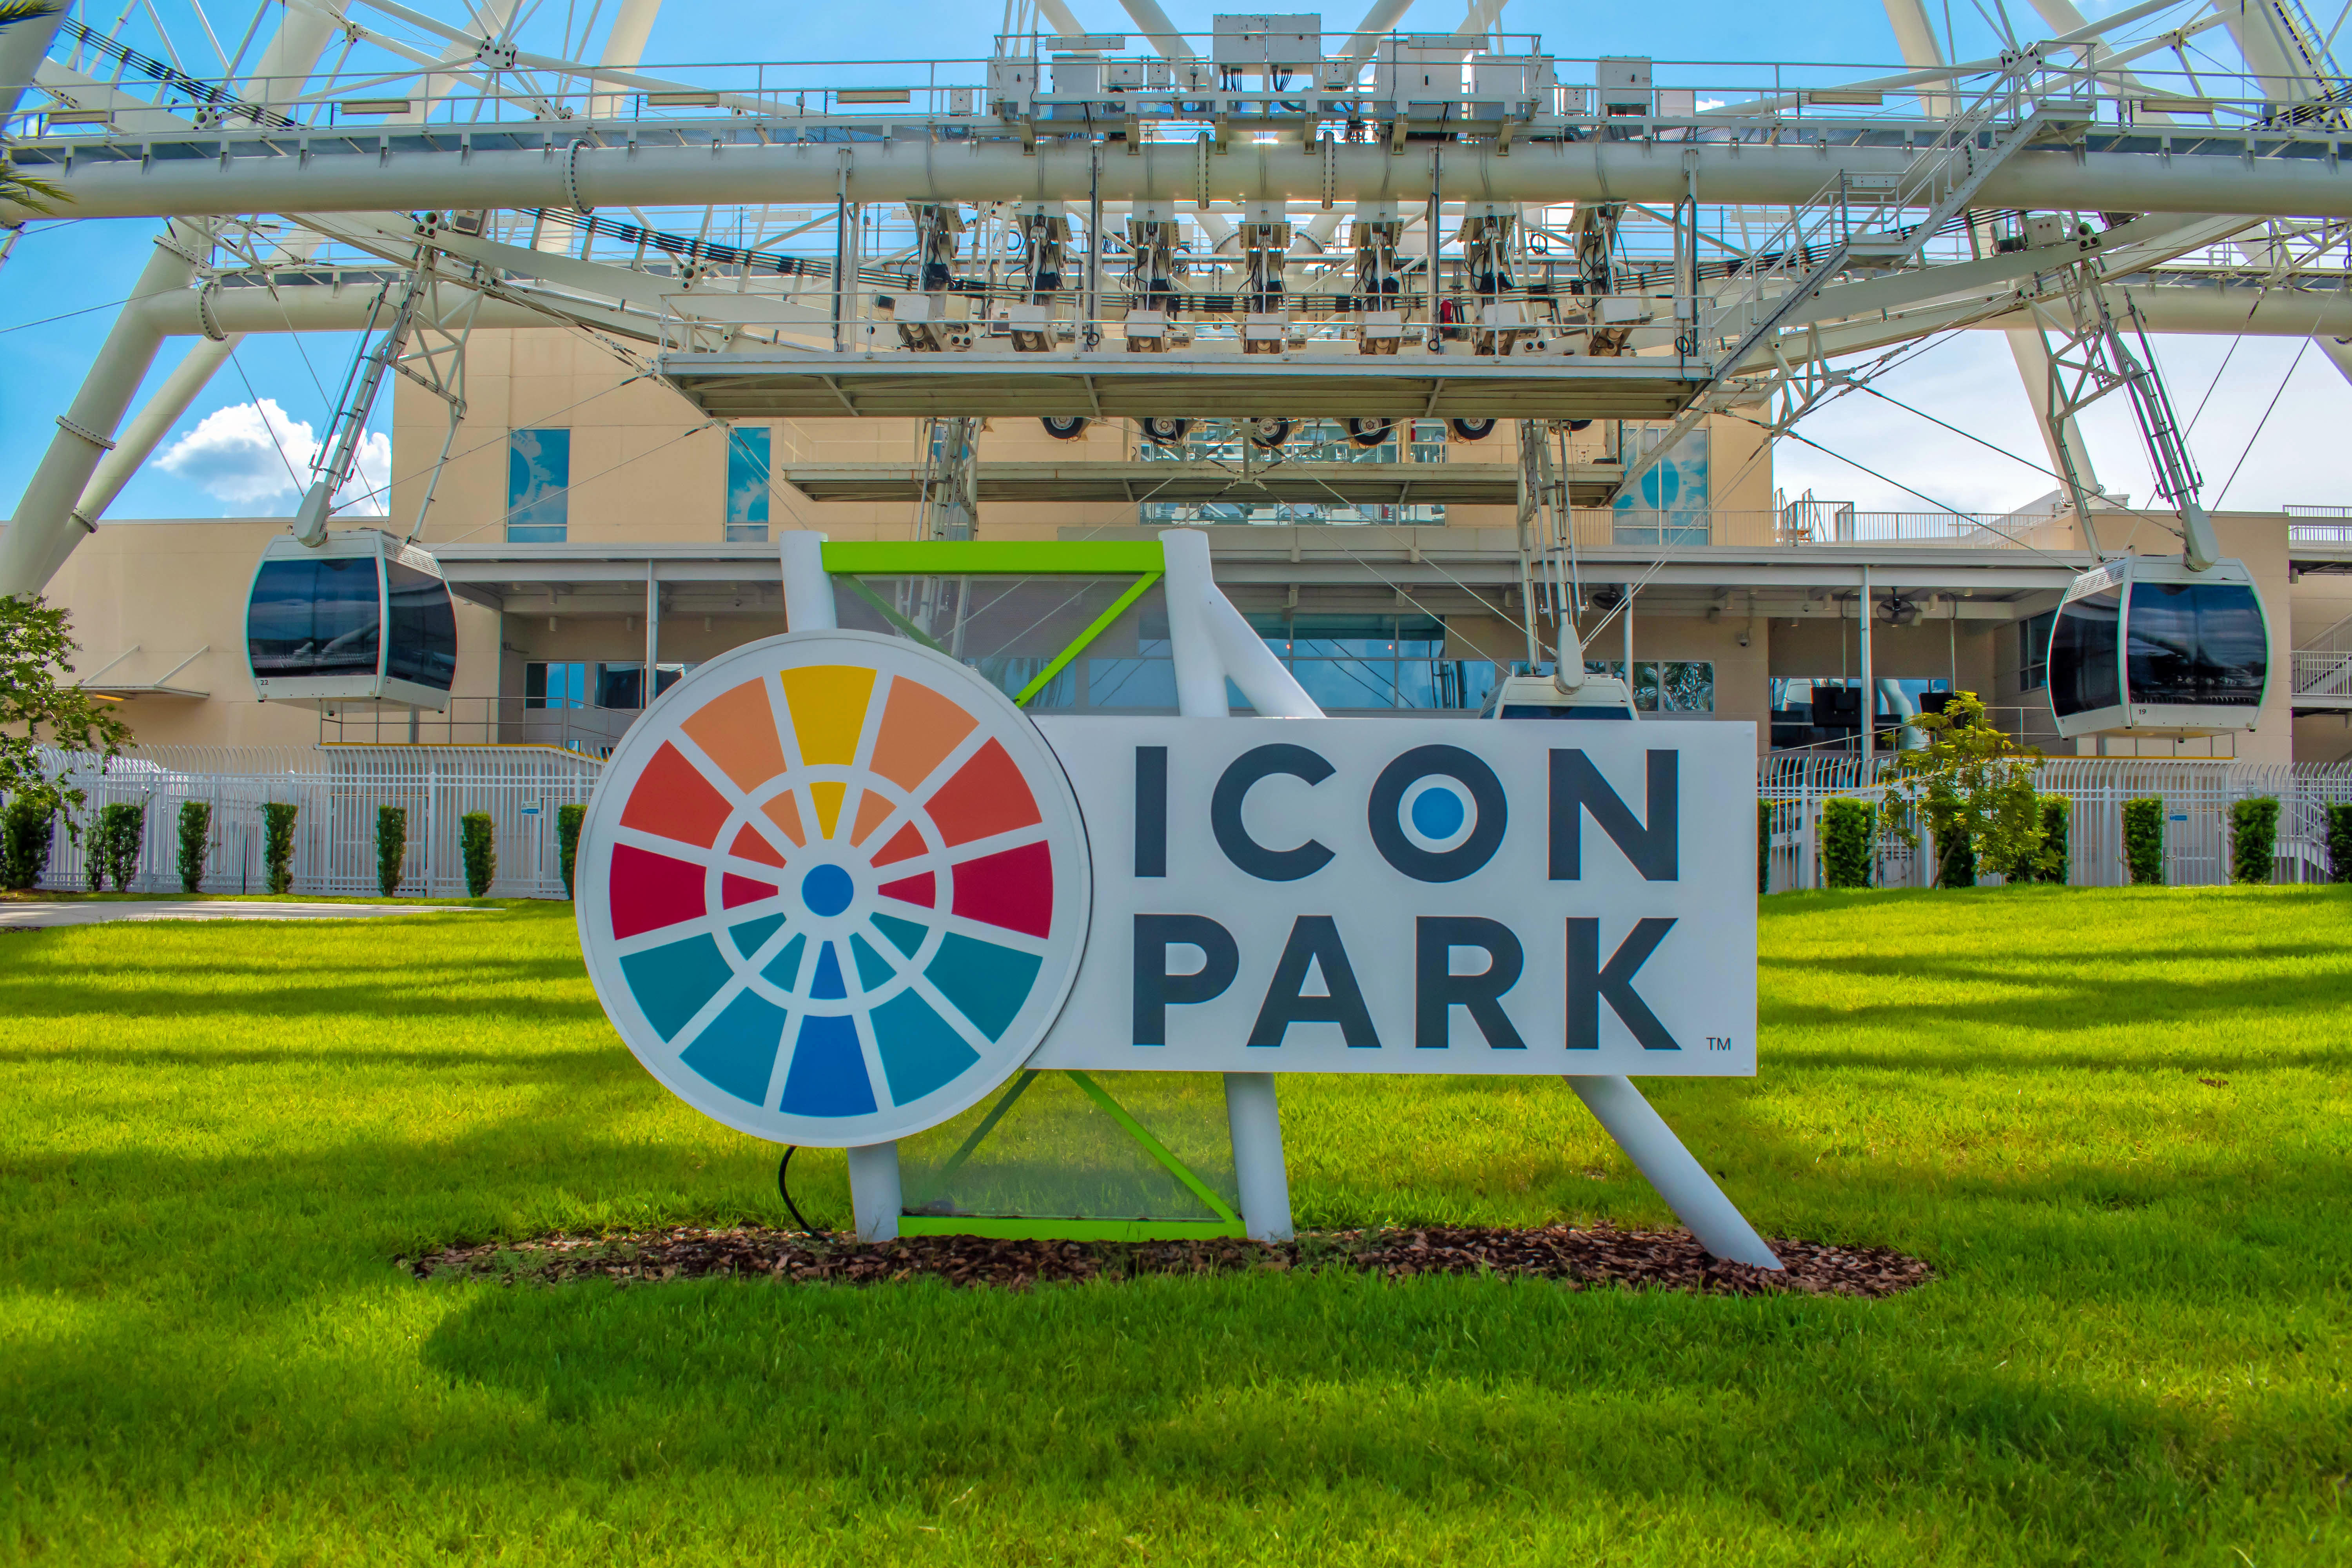 Welcome to the ICON Park